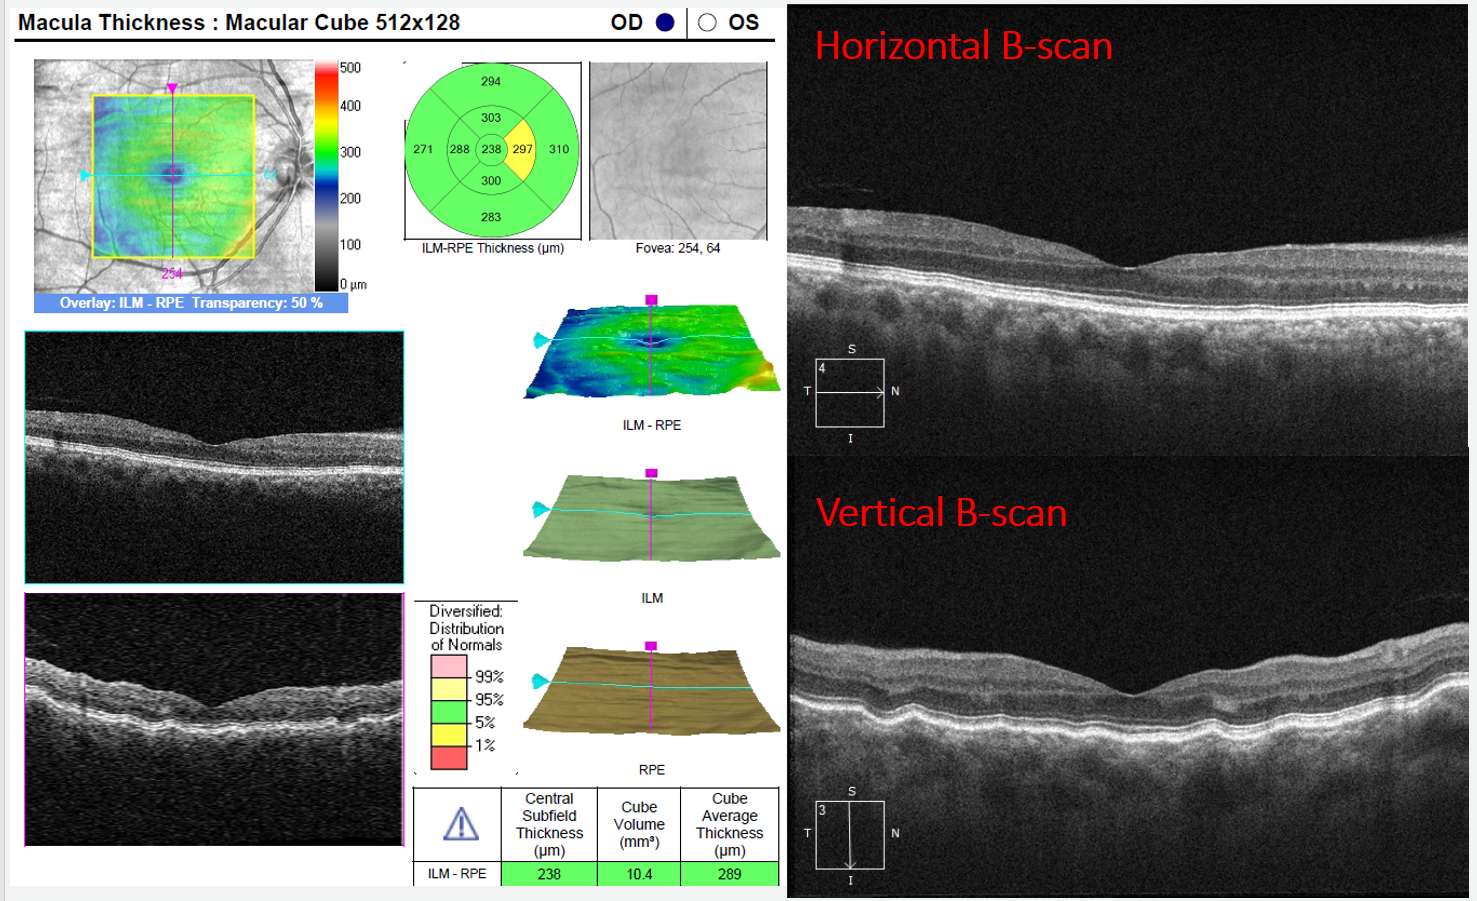 In this case of choroidal folds minimal RPE disruption is seen on the horizontal scan while the vertical scan makes the choroidal and retinal effects apparent